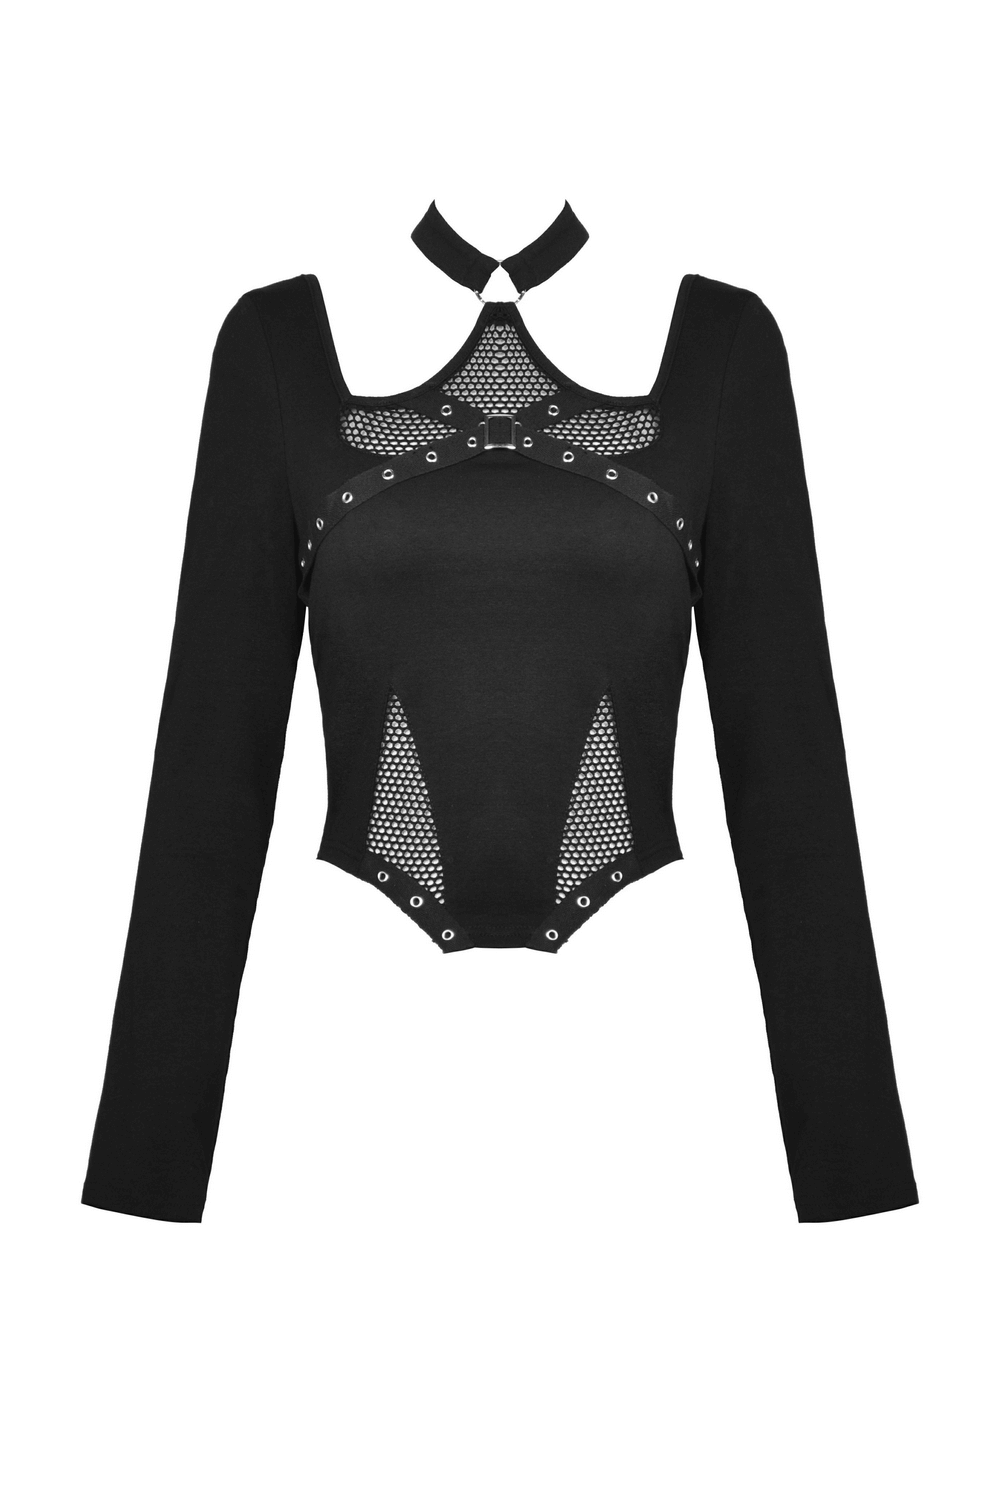 Stylish Mesh Crop Top with Choker and Long Sleeves